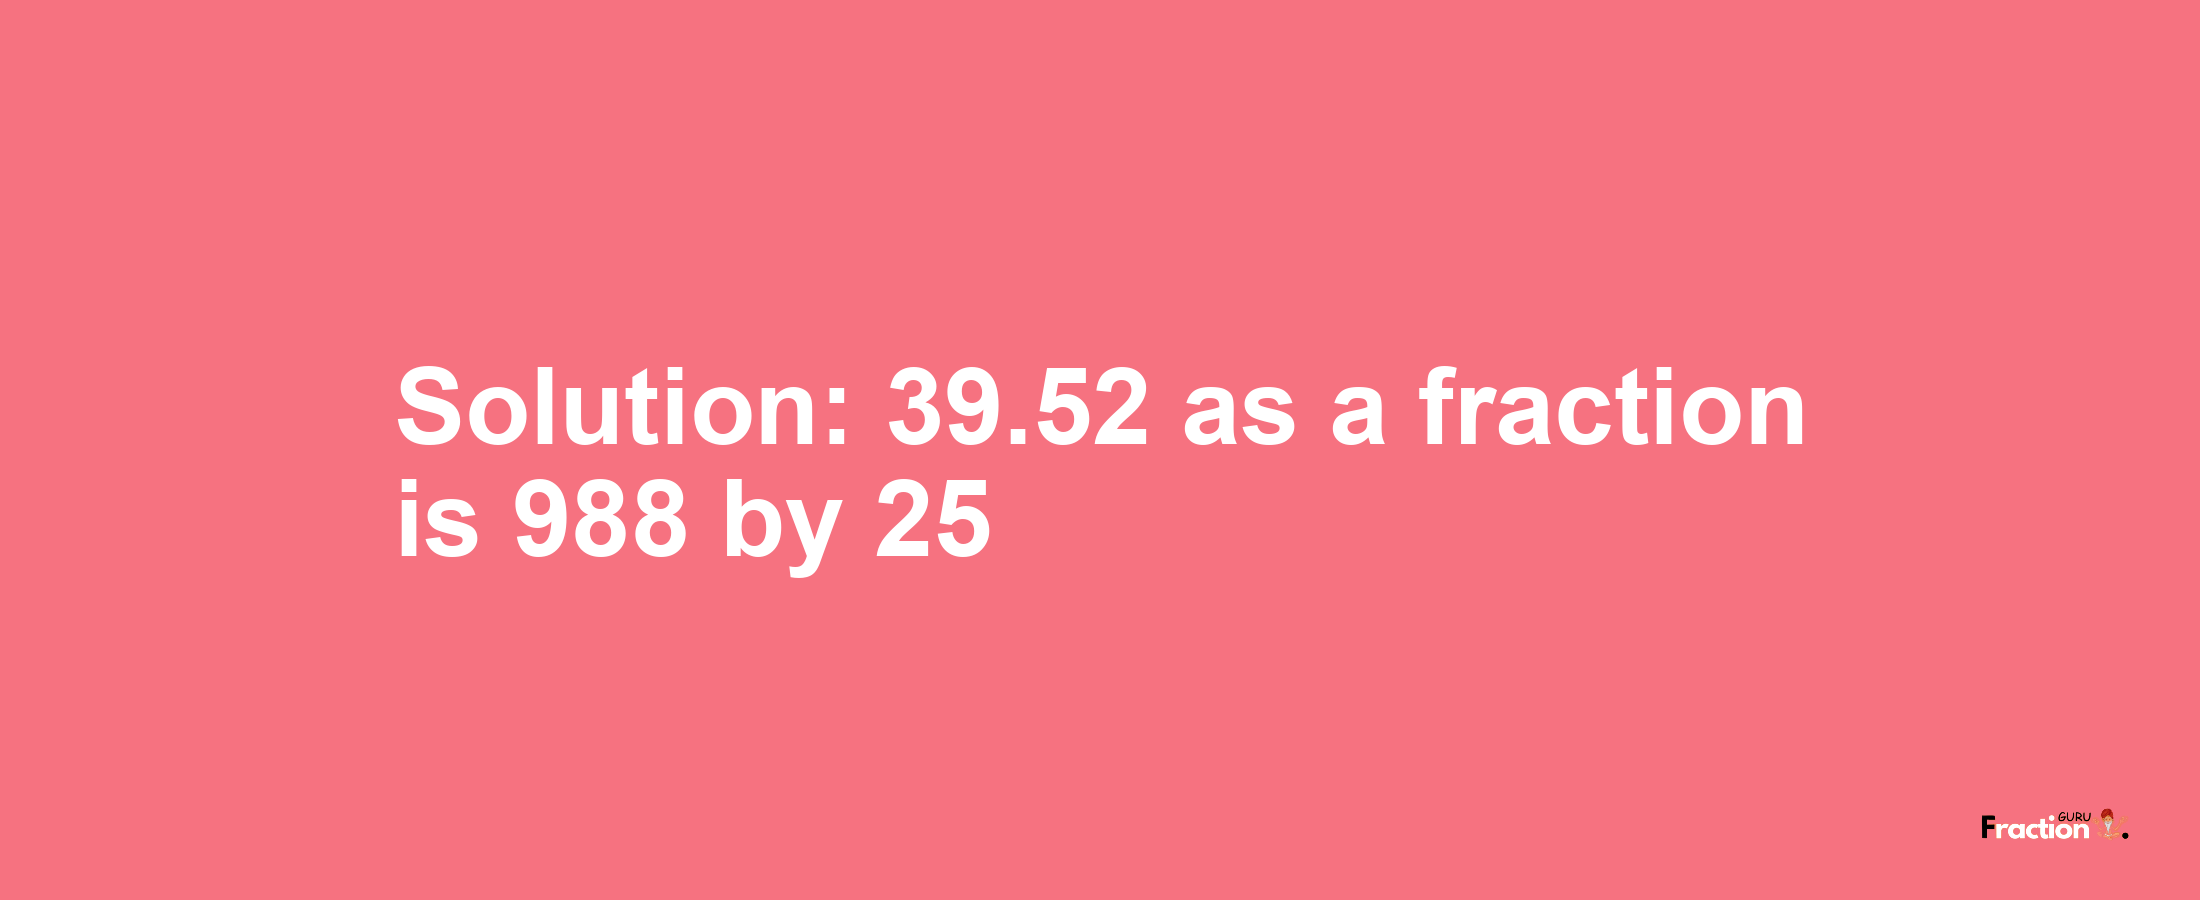 Solution:39.52 as a fraction is 988/25